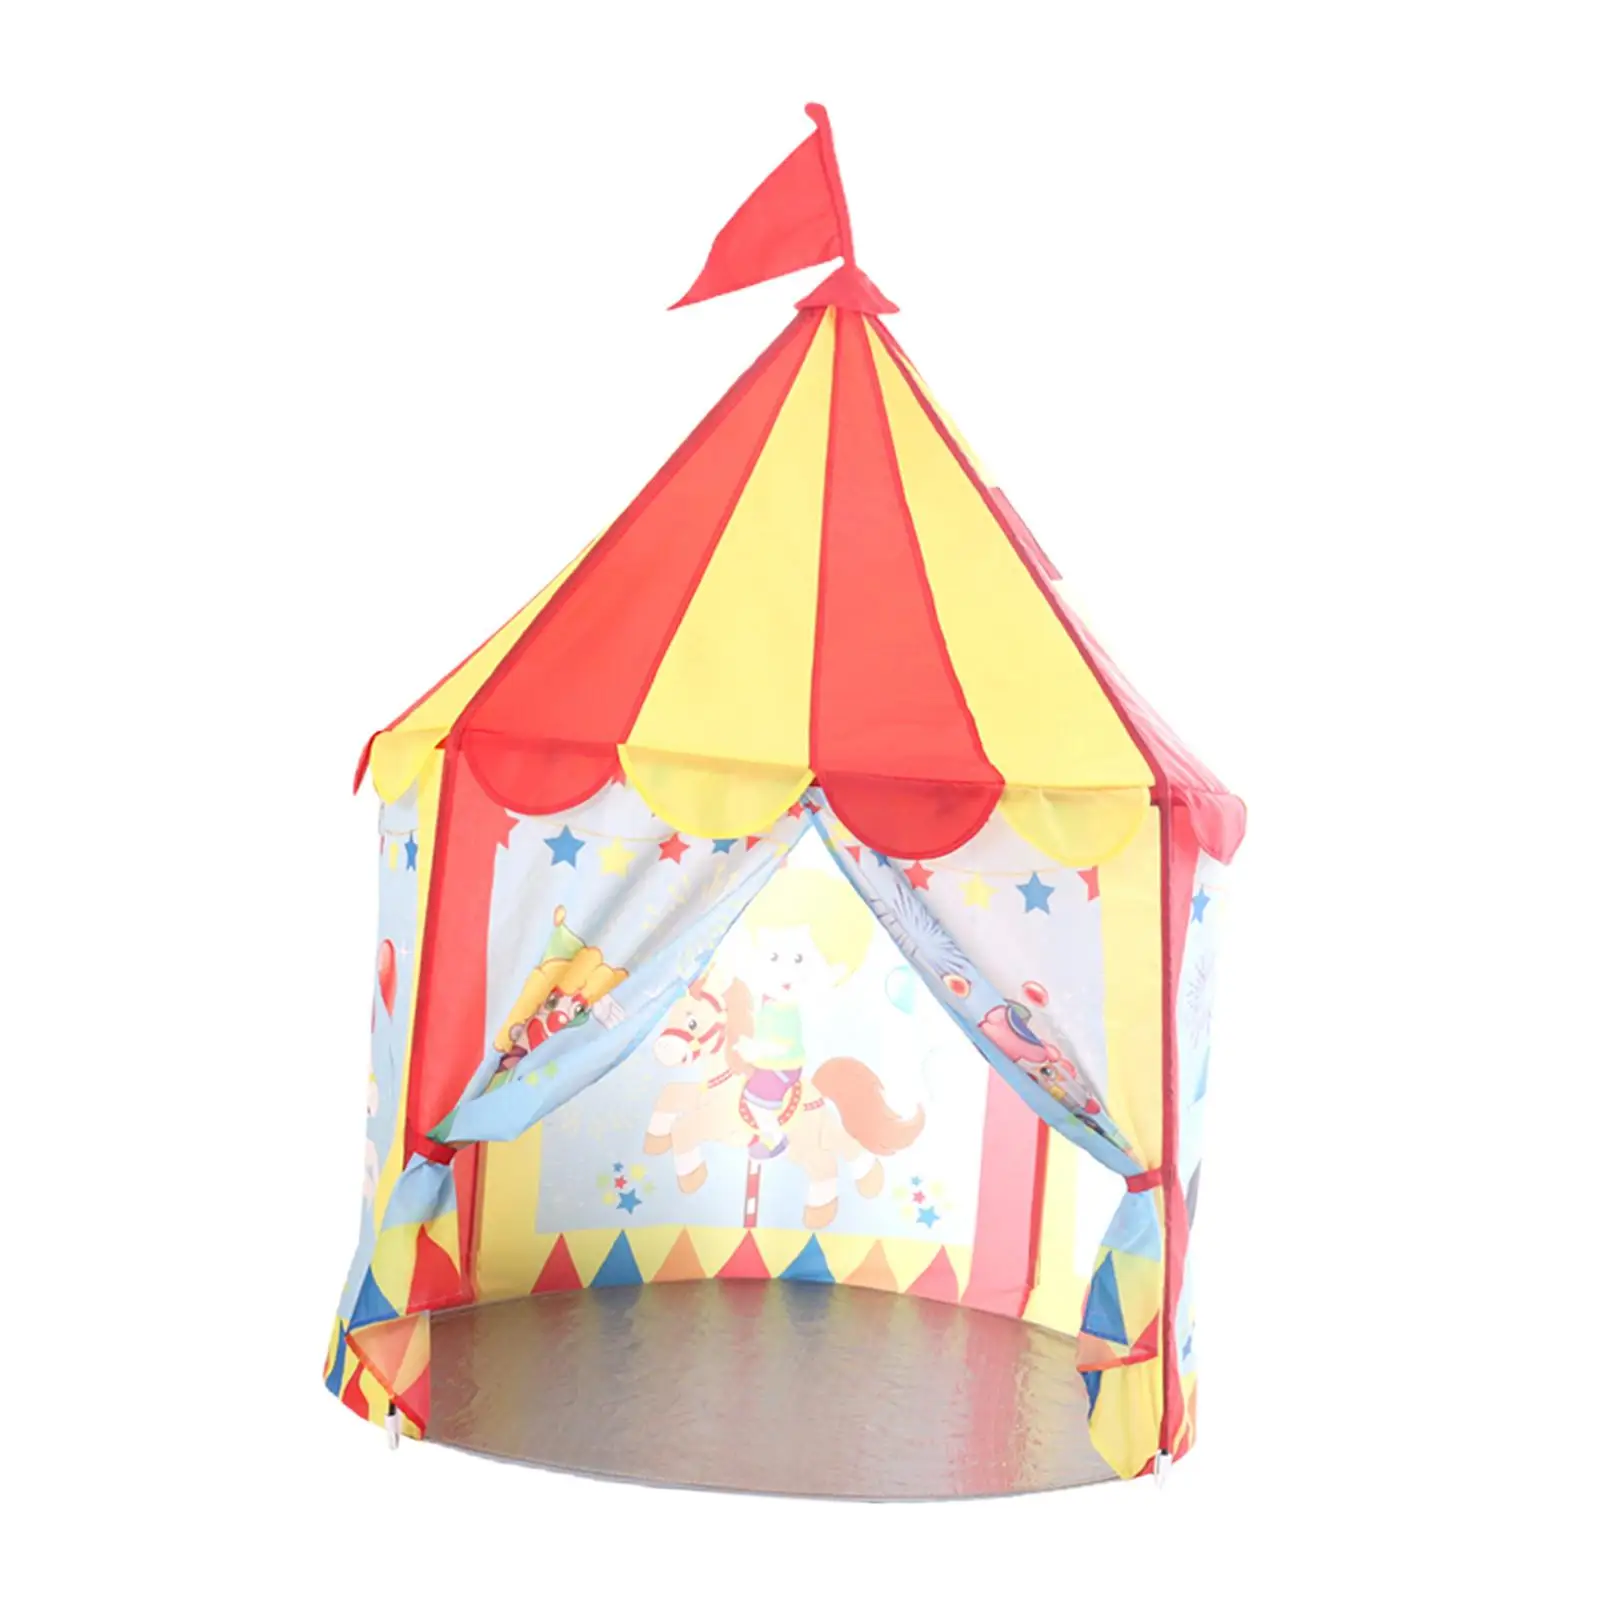 Play Tent House Portable Birthday Gift Kids Playhouse for Games Camping Home